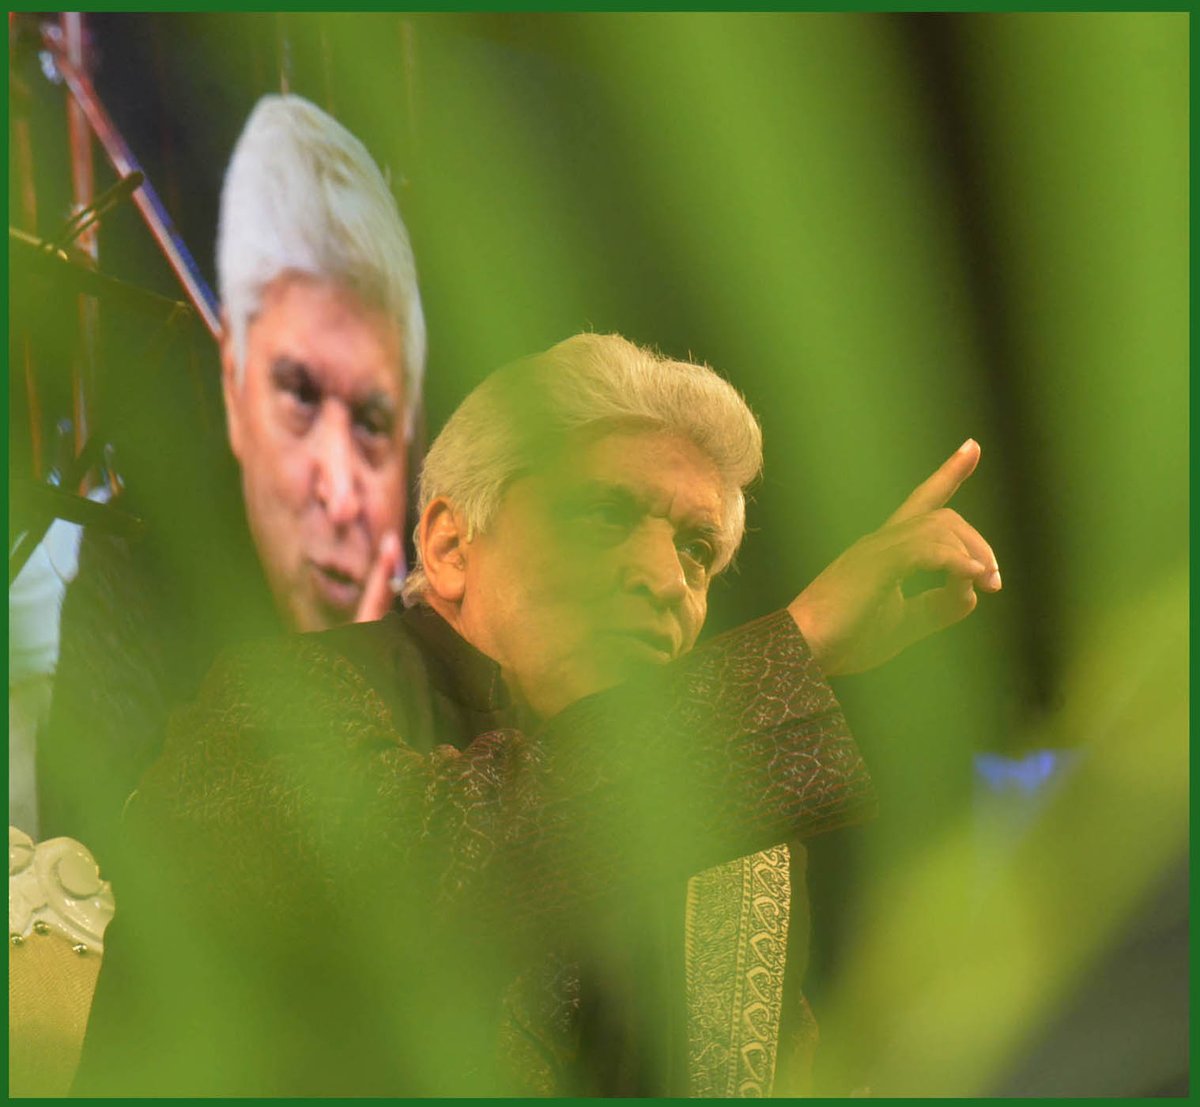 @Javedakhtarjadu -A picture for you .Photographed by Pradeep Chandra